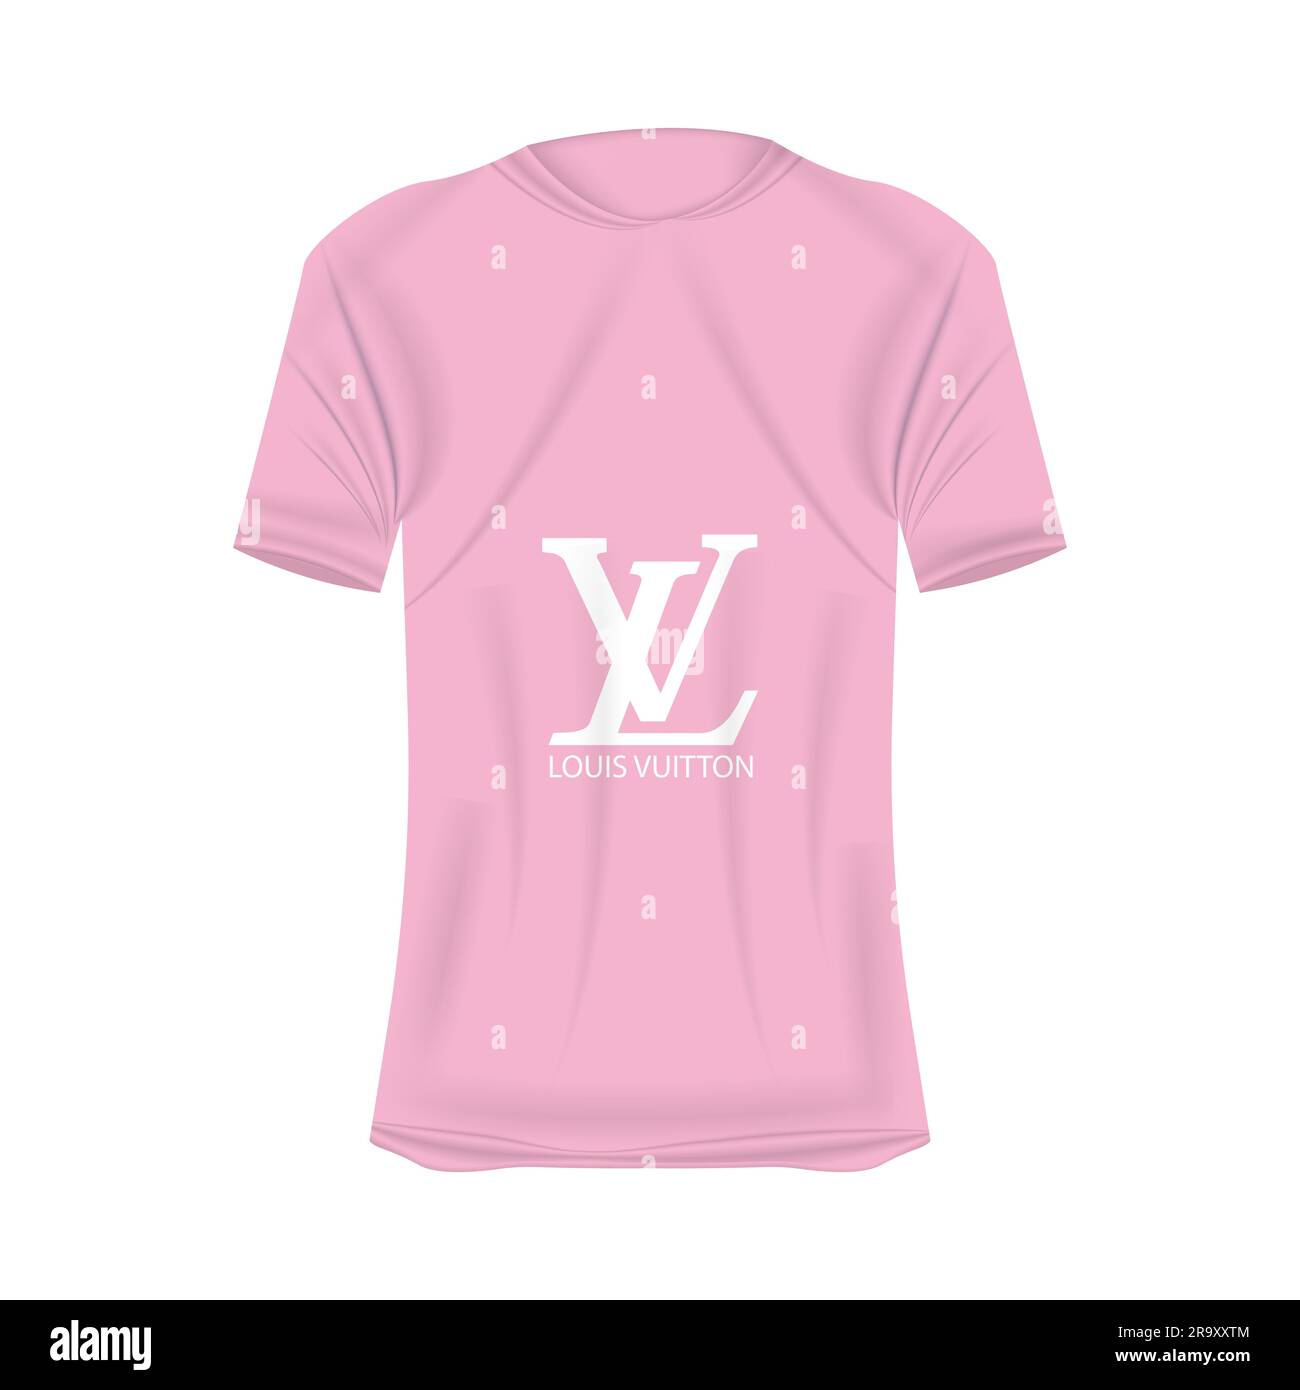 Premium Vector  Louis vuitton logo tshirt mockup in gray colors mockup of  realistic shirt with short sleeves blank tshirt template with empty space  for design louisvuitton brand